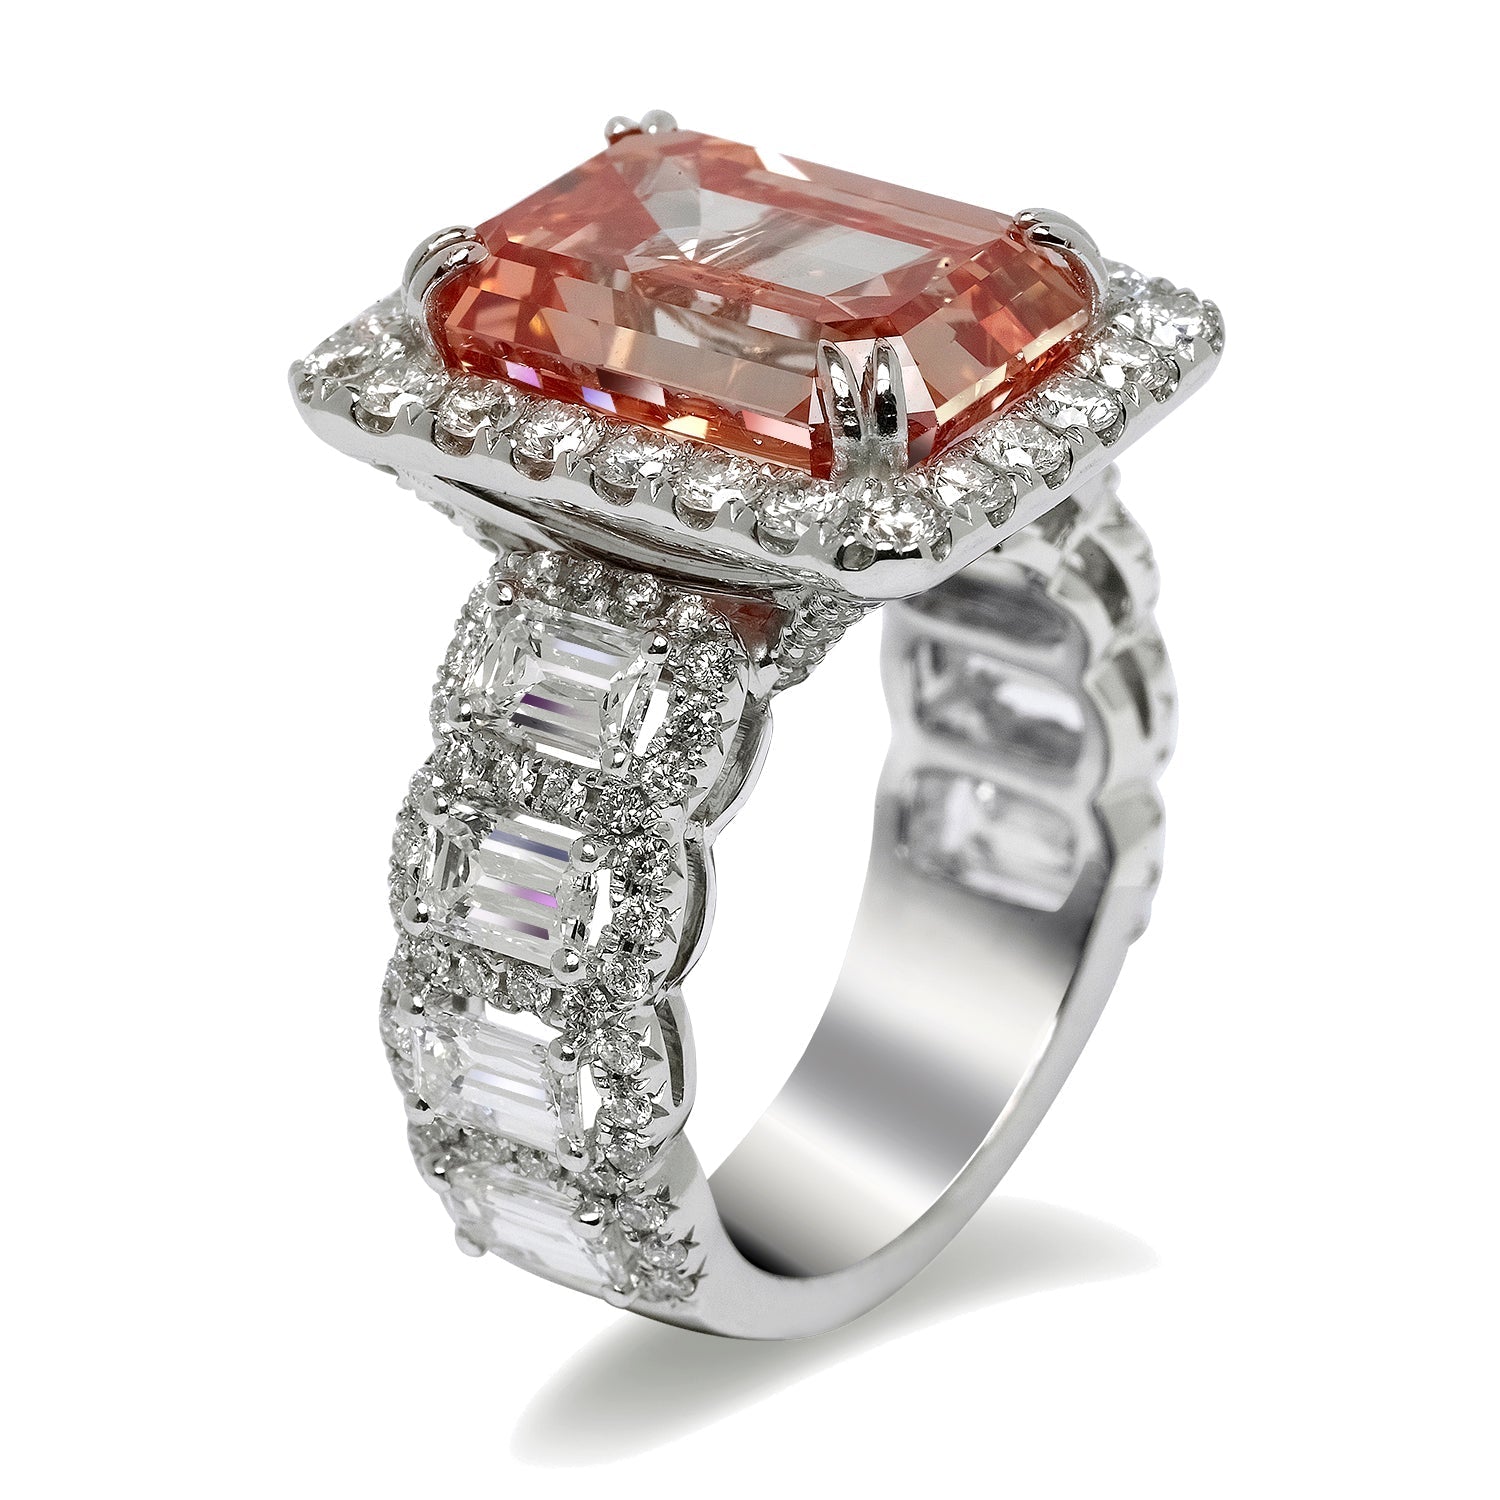 Orangy Pink Diamond Ring Emerald Cut 15 Carat Halo Ring in 18K White Gold Side View